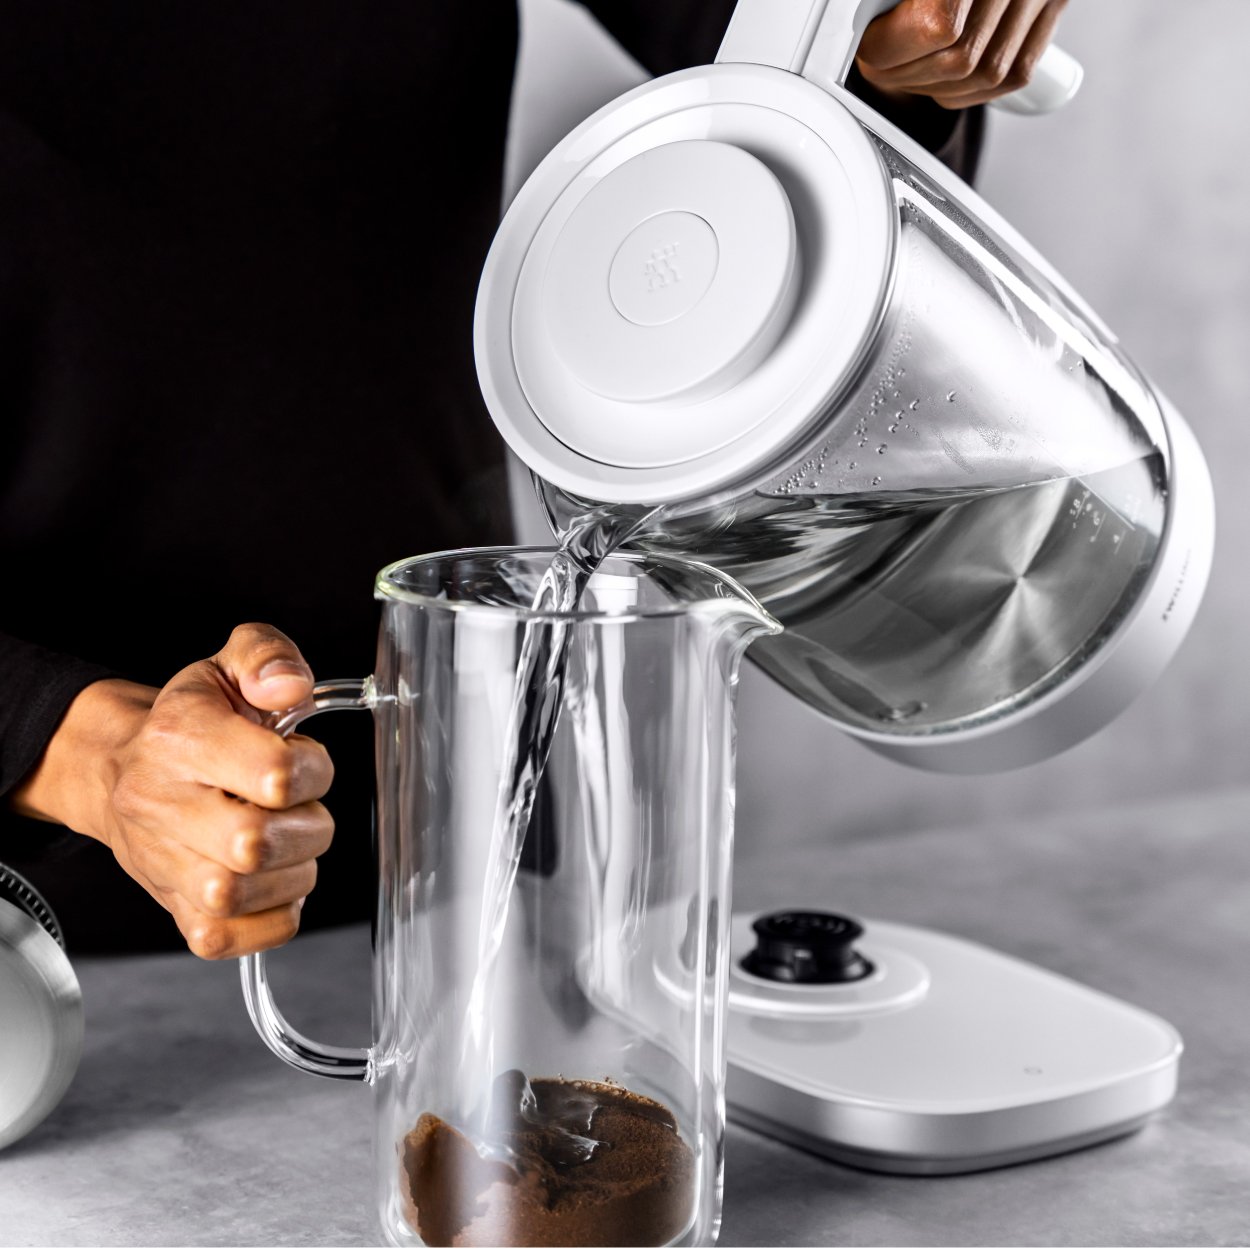 ZWILLING Enfinigy Electric Glass Kettle